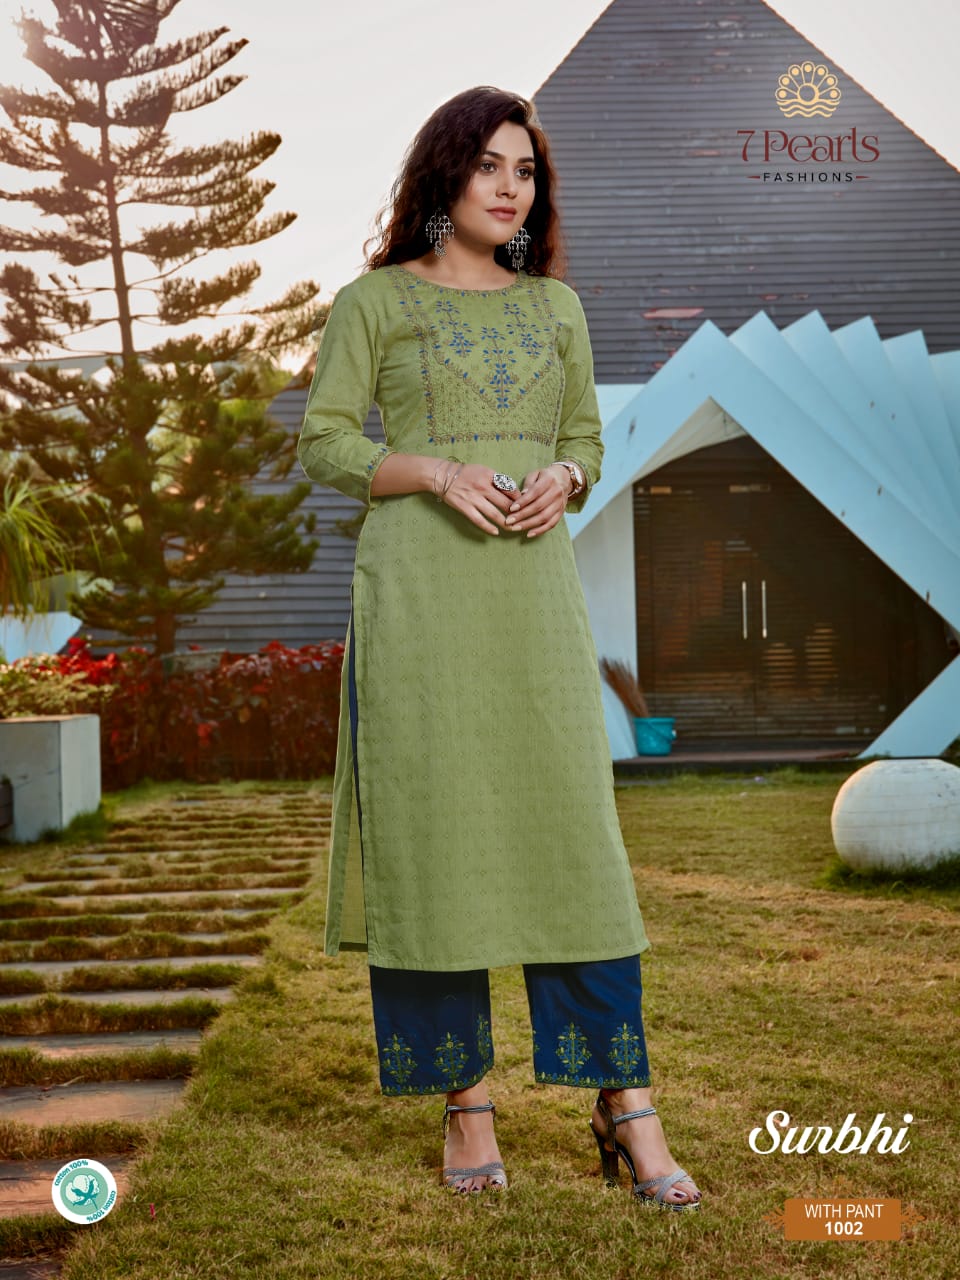 7 pearls surbhi cotton authentic fabric kurti with pant catalog